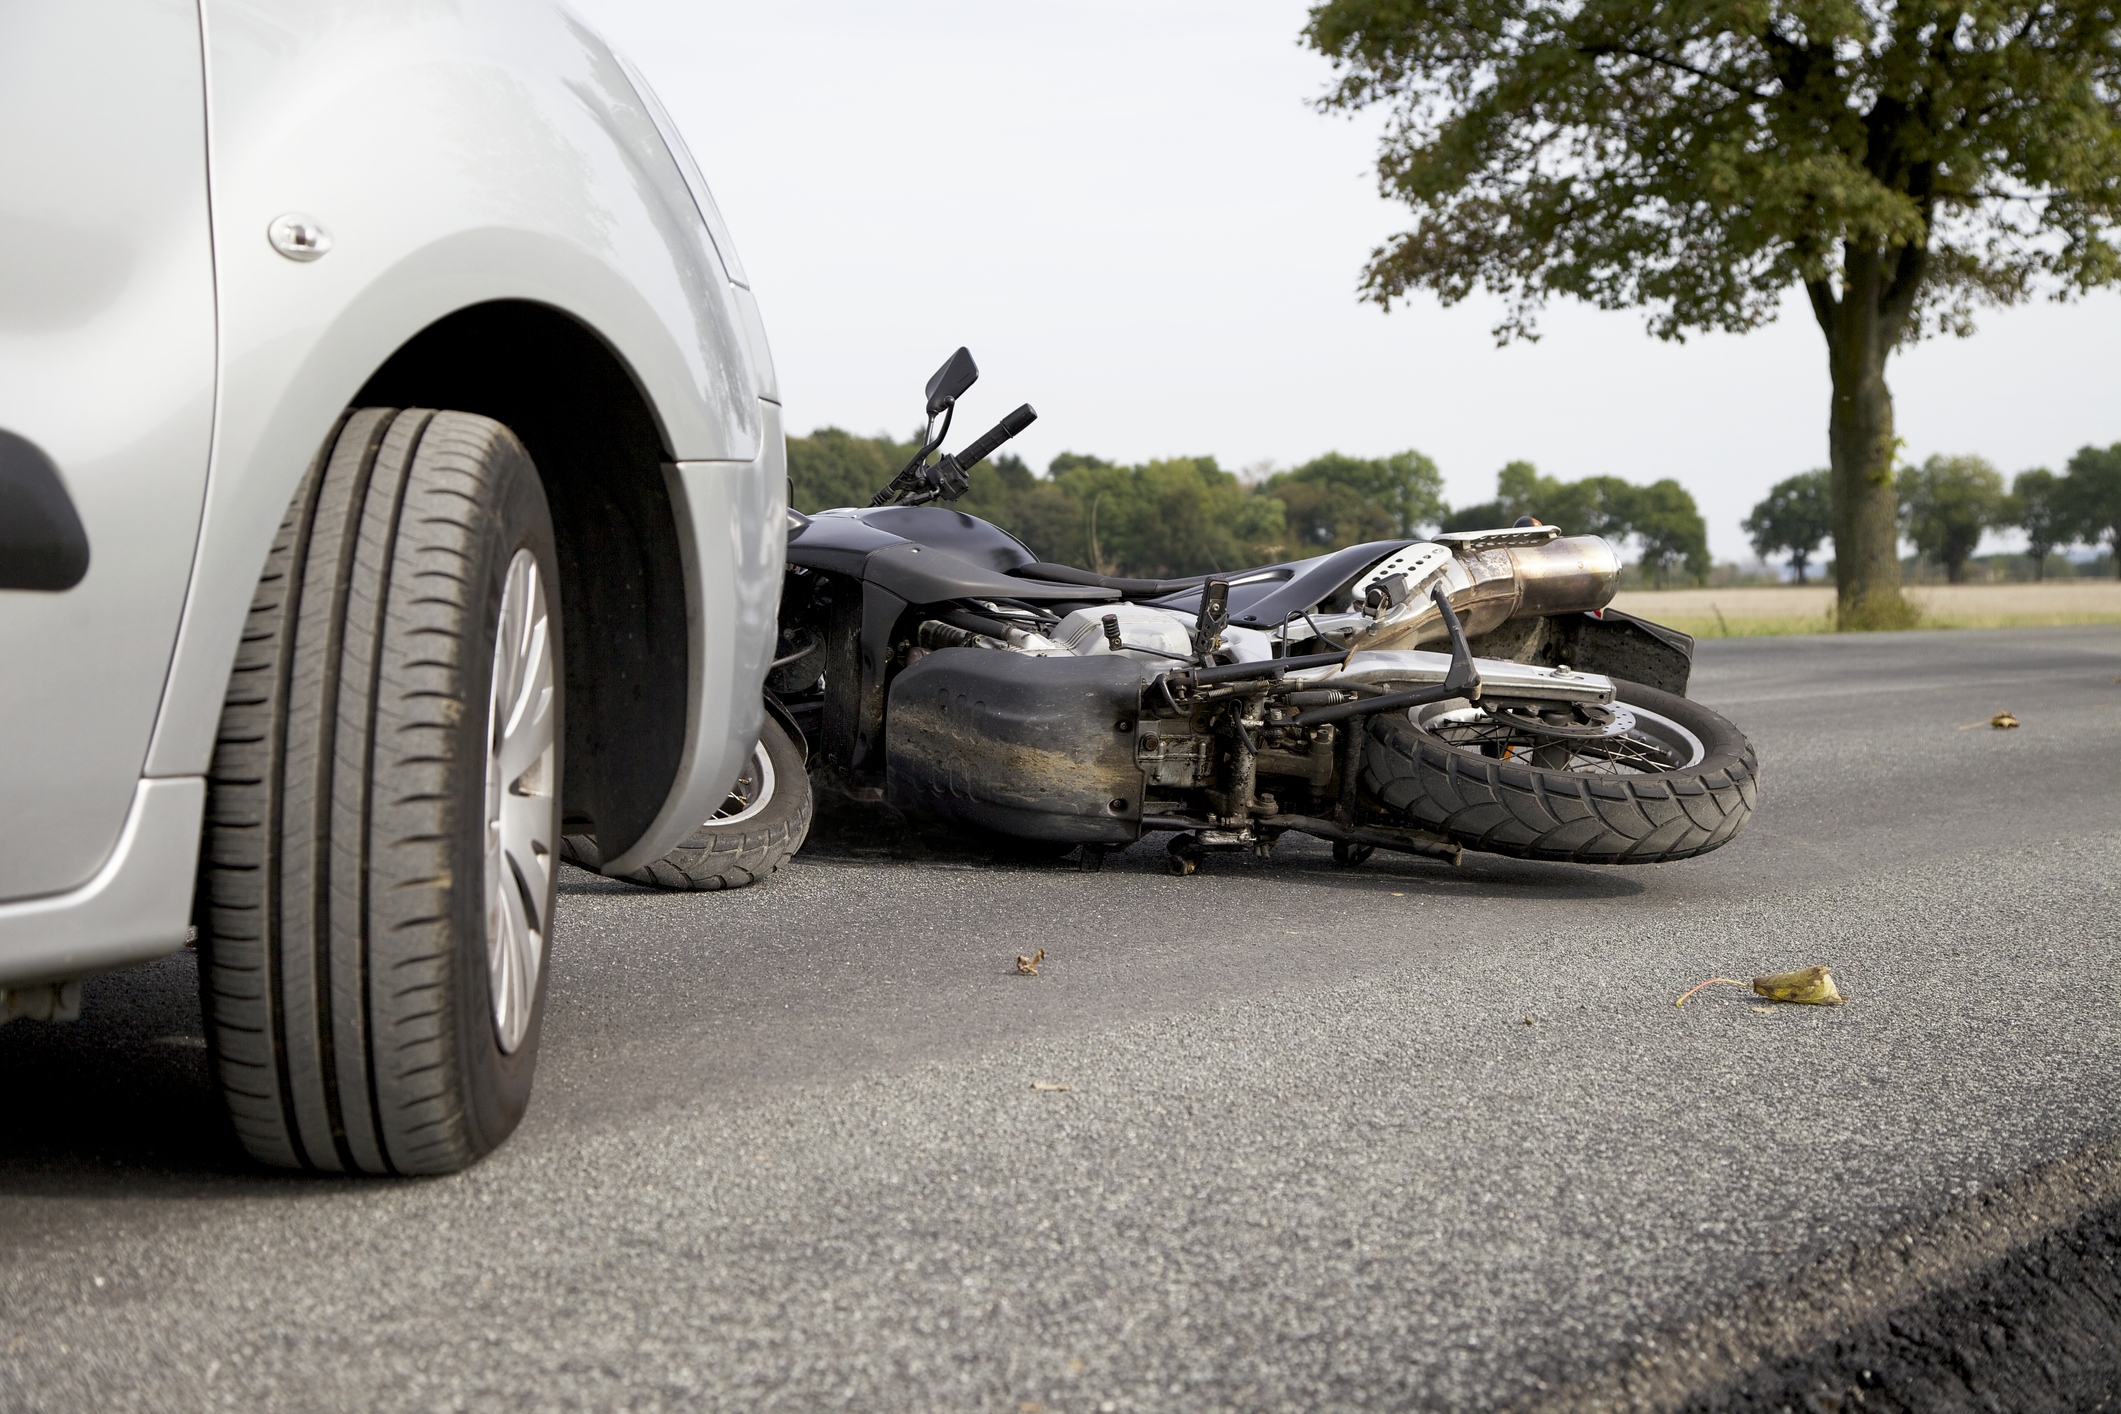 Motorcycle Accidents in New York